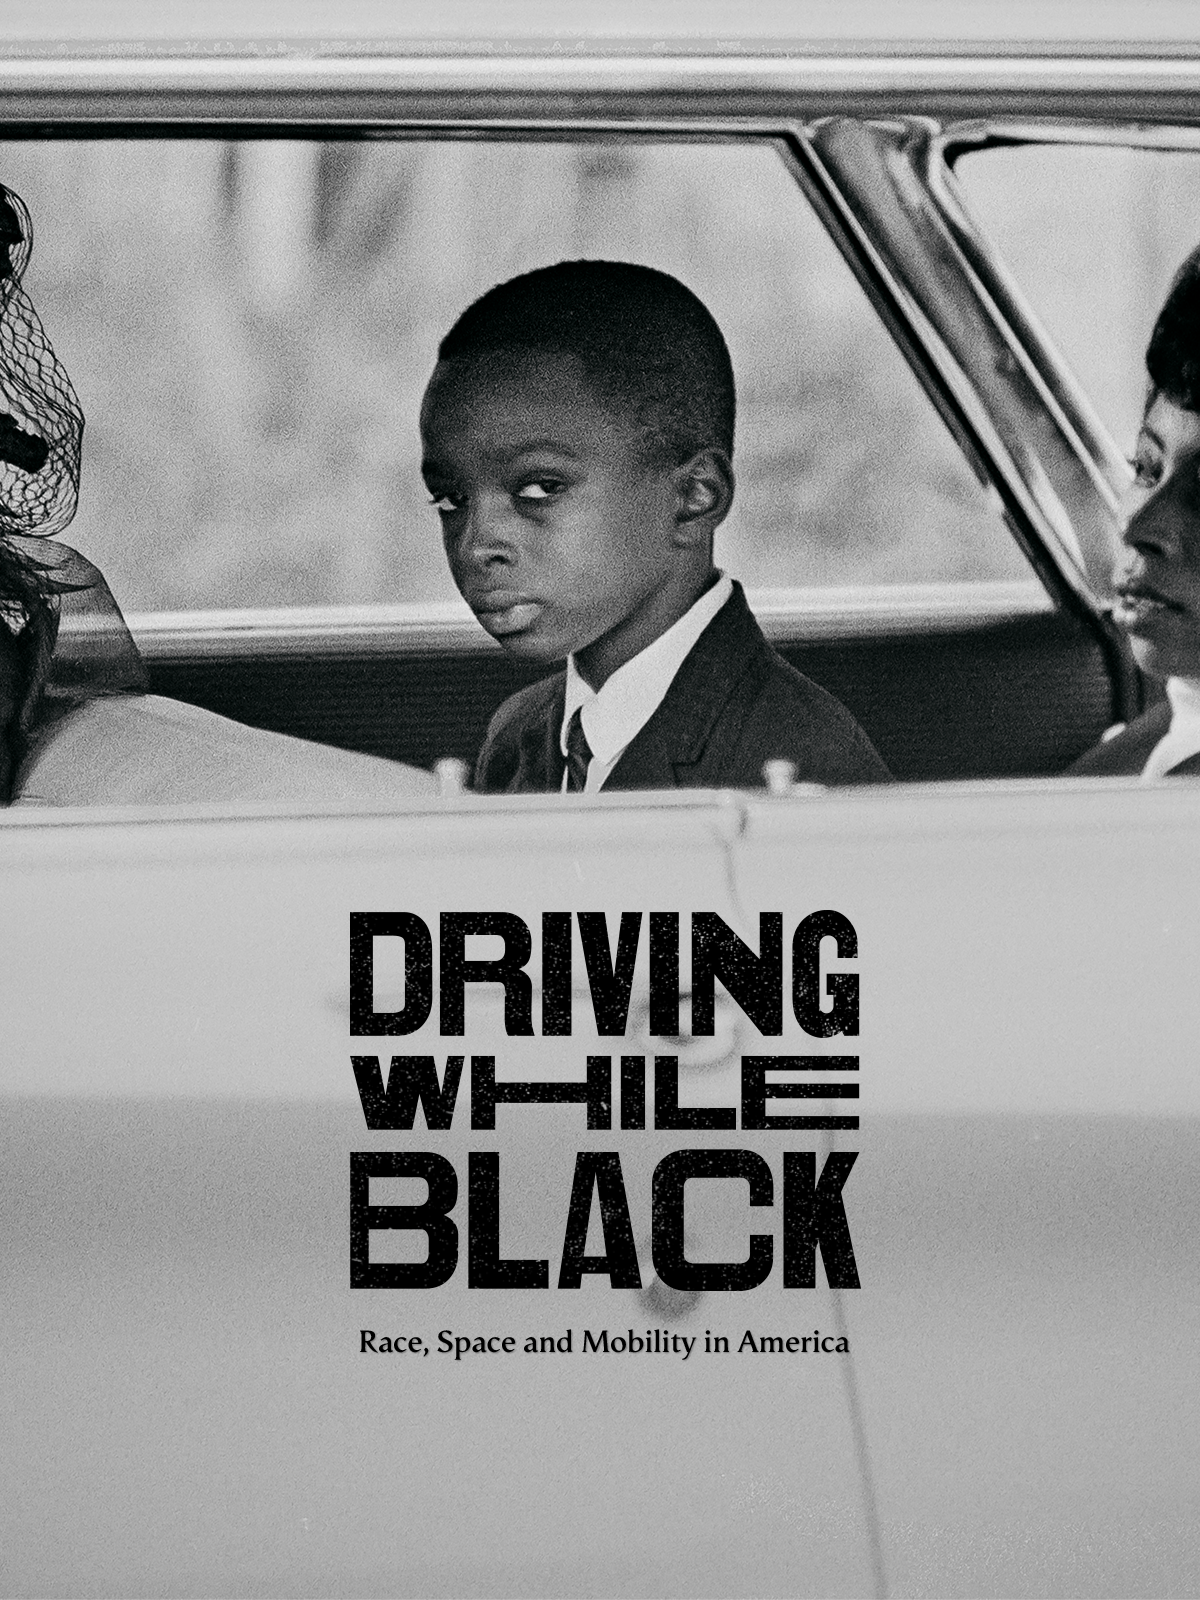 Driving While Black: Race, Space and Mobility in America | PBS